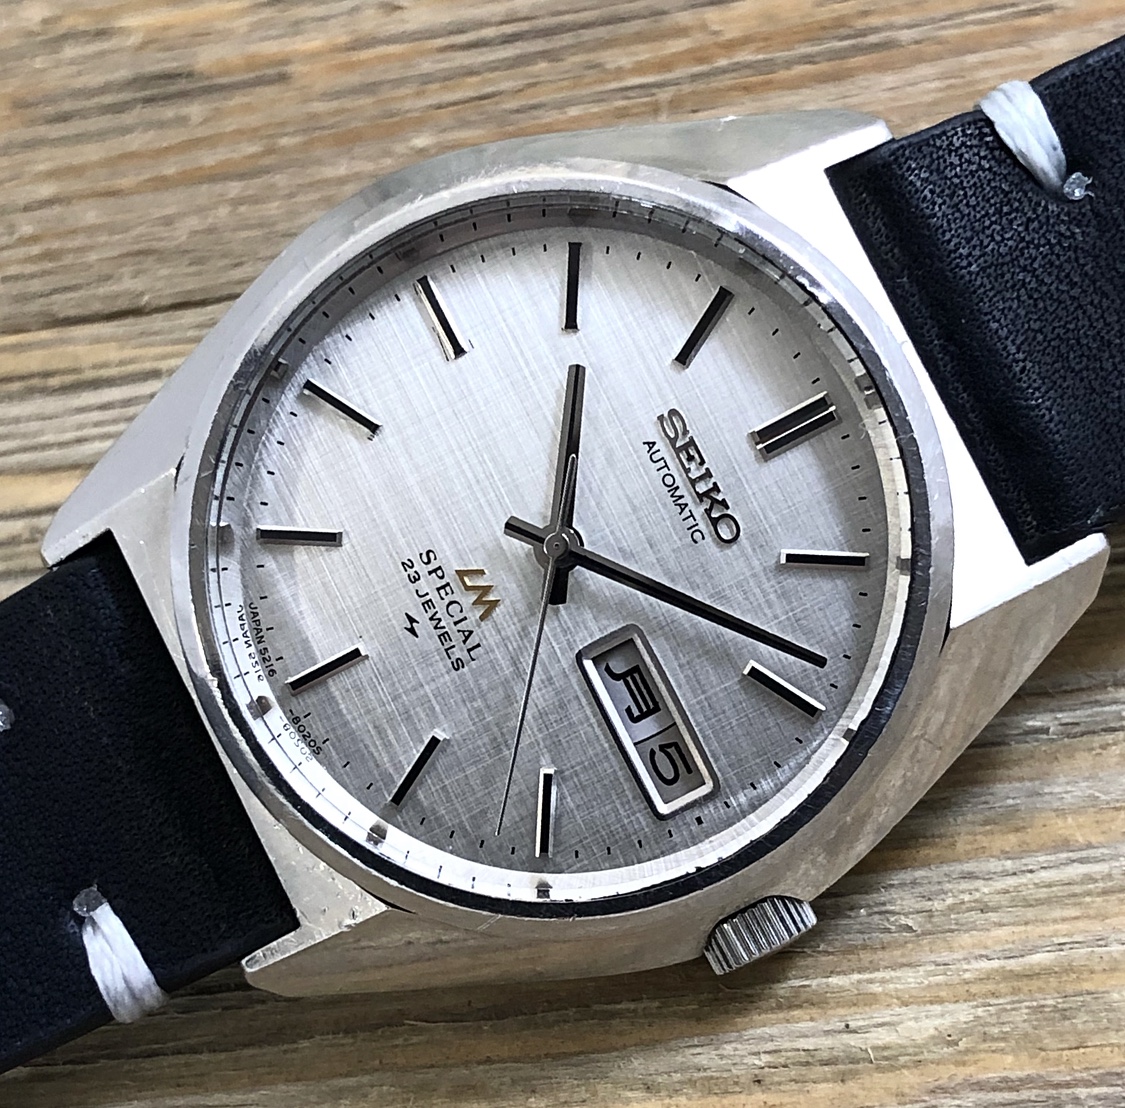 1975 JDM Seiko 5216-8020 Lord Matic “Special” Hi-Beat 28,800 Automatic